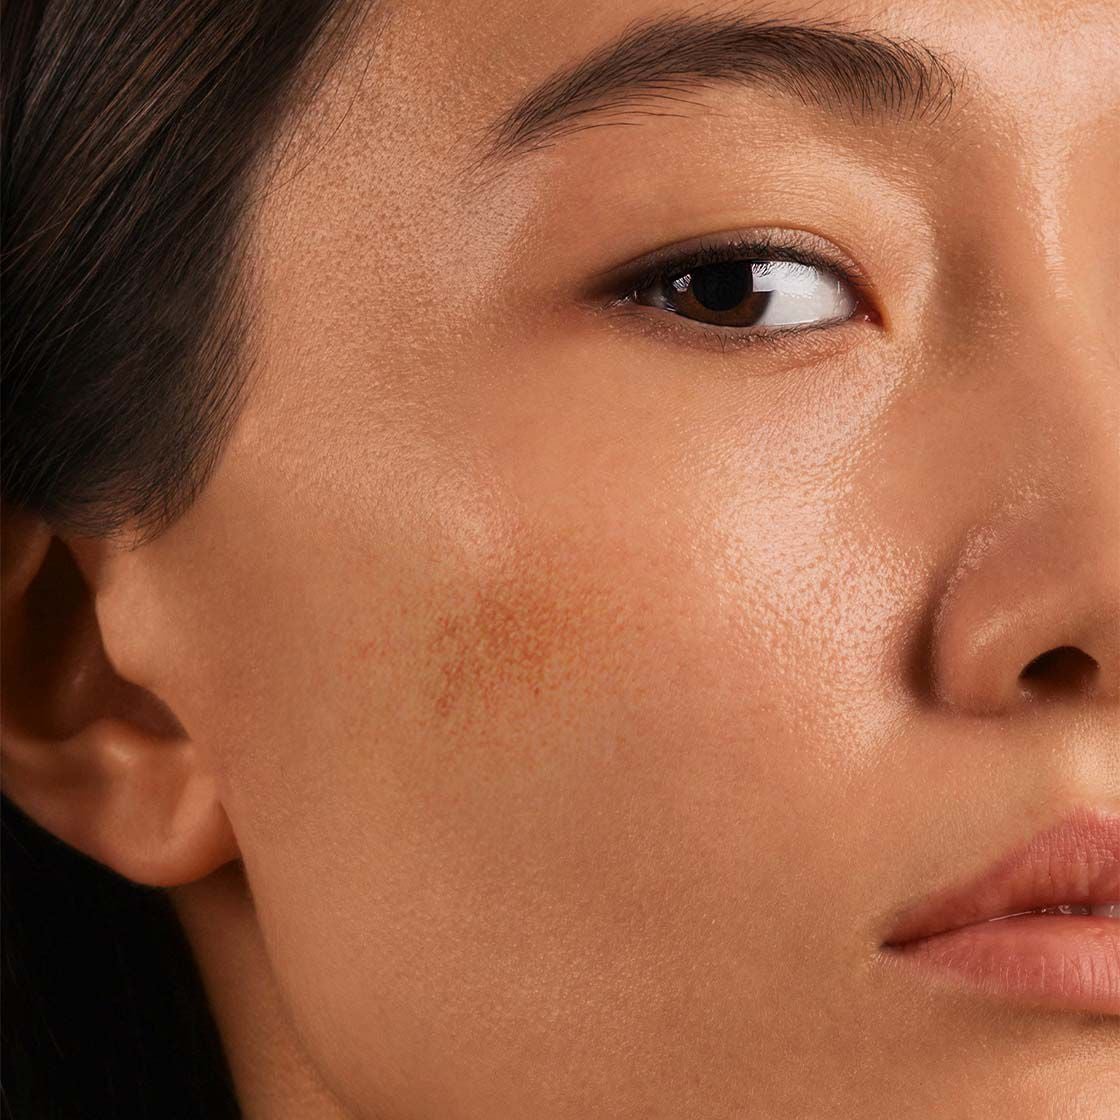 7 Ways to Even-Out Your Skin Tone, According to Dermatologists